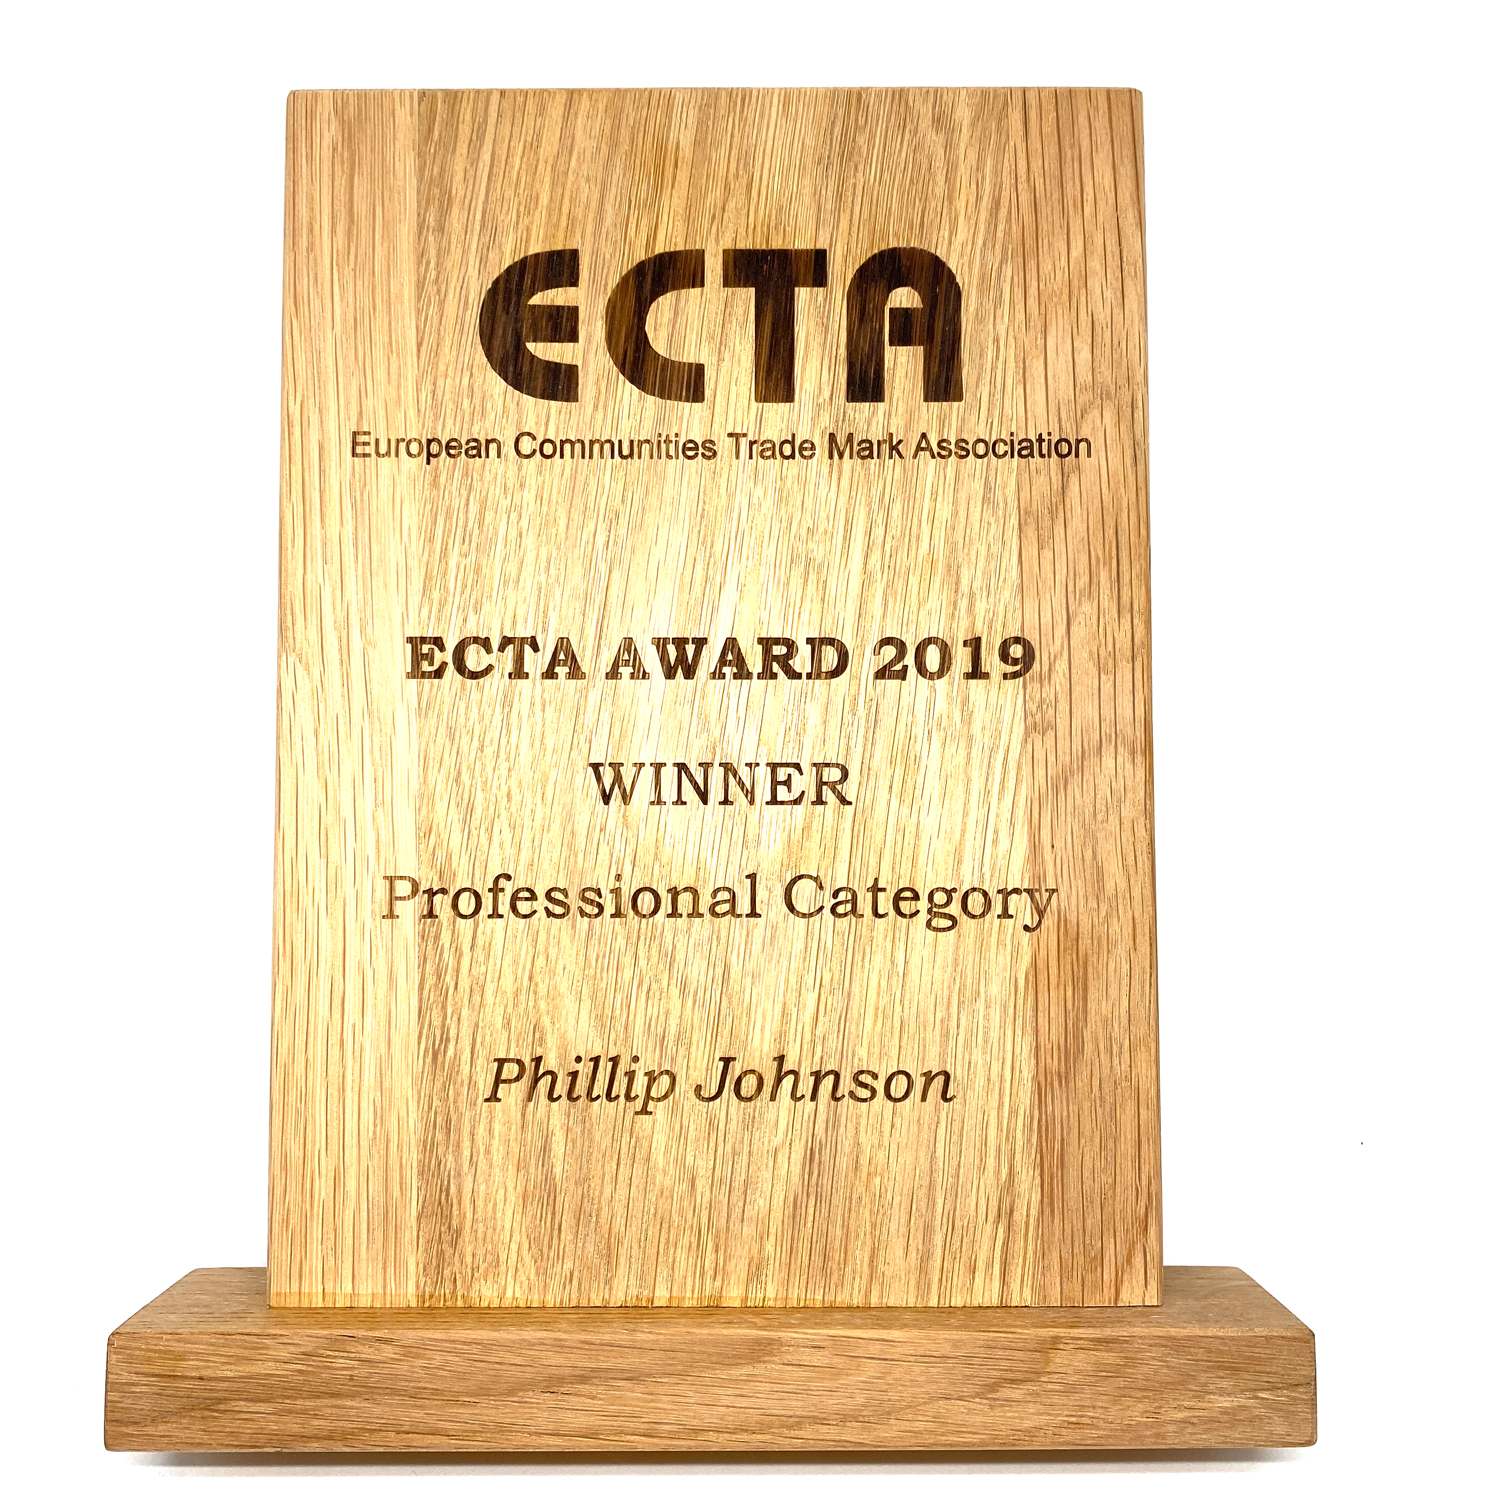 Customized wooden award with laser engraving (250 x 180 x 20 mm)